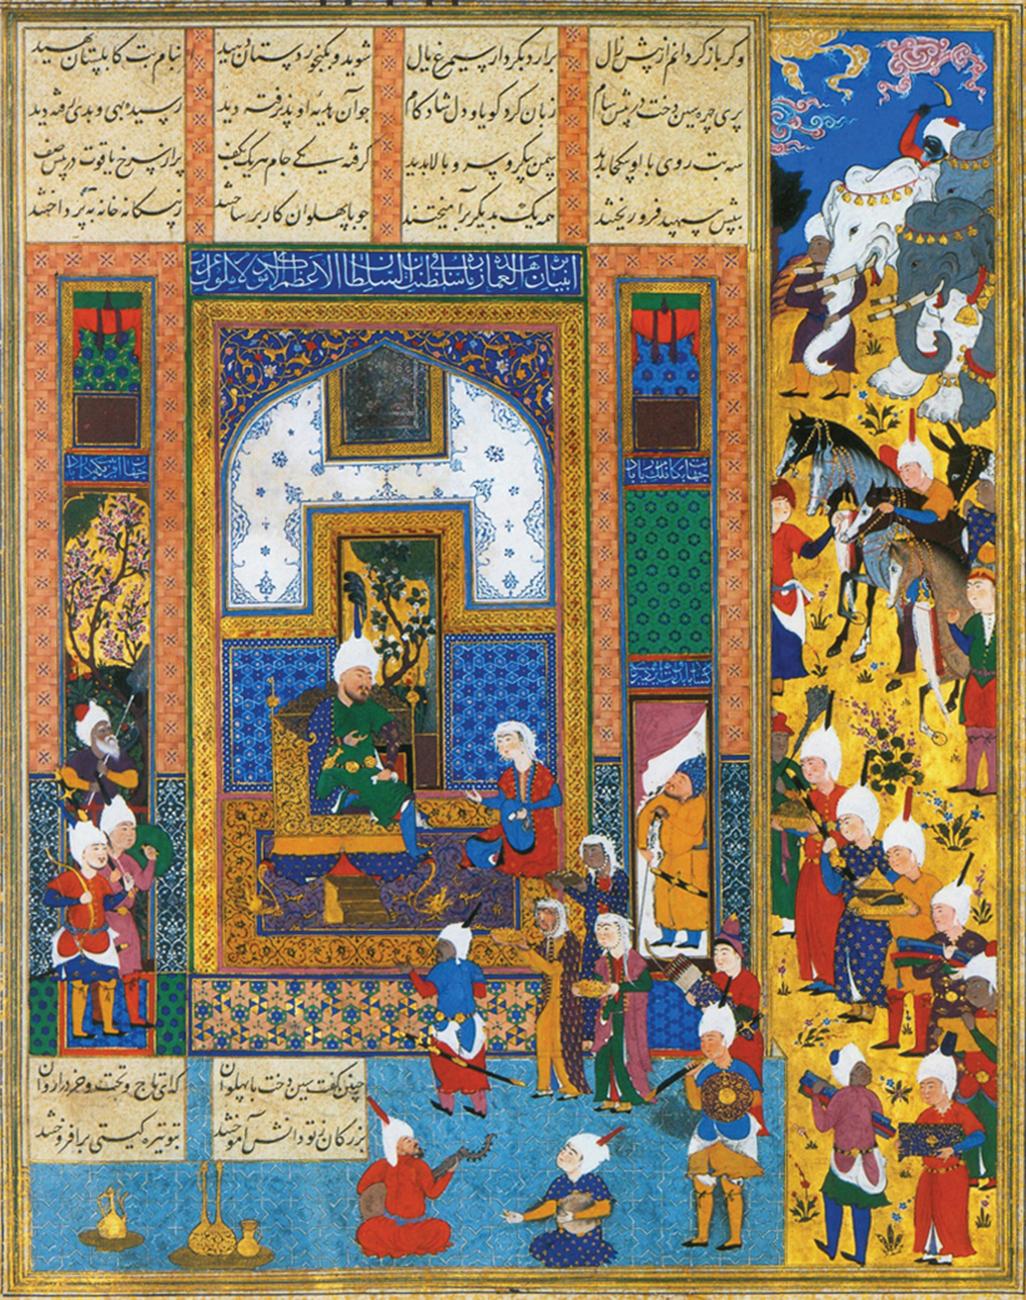 Brightly colored illustration of a scene from the Book of Kings